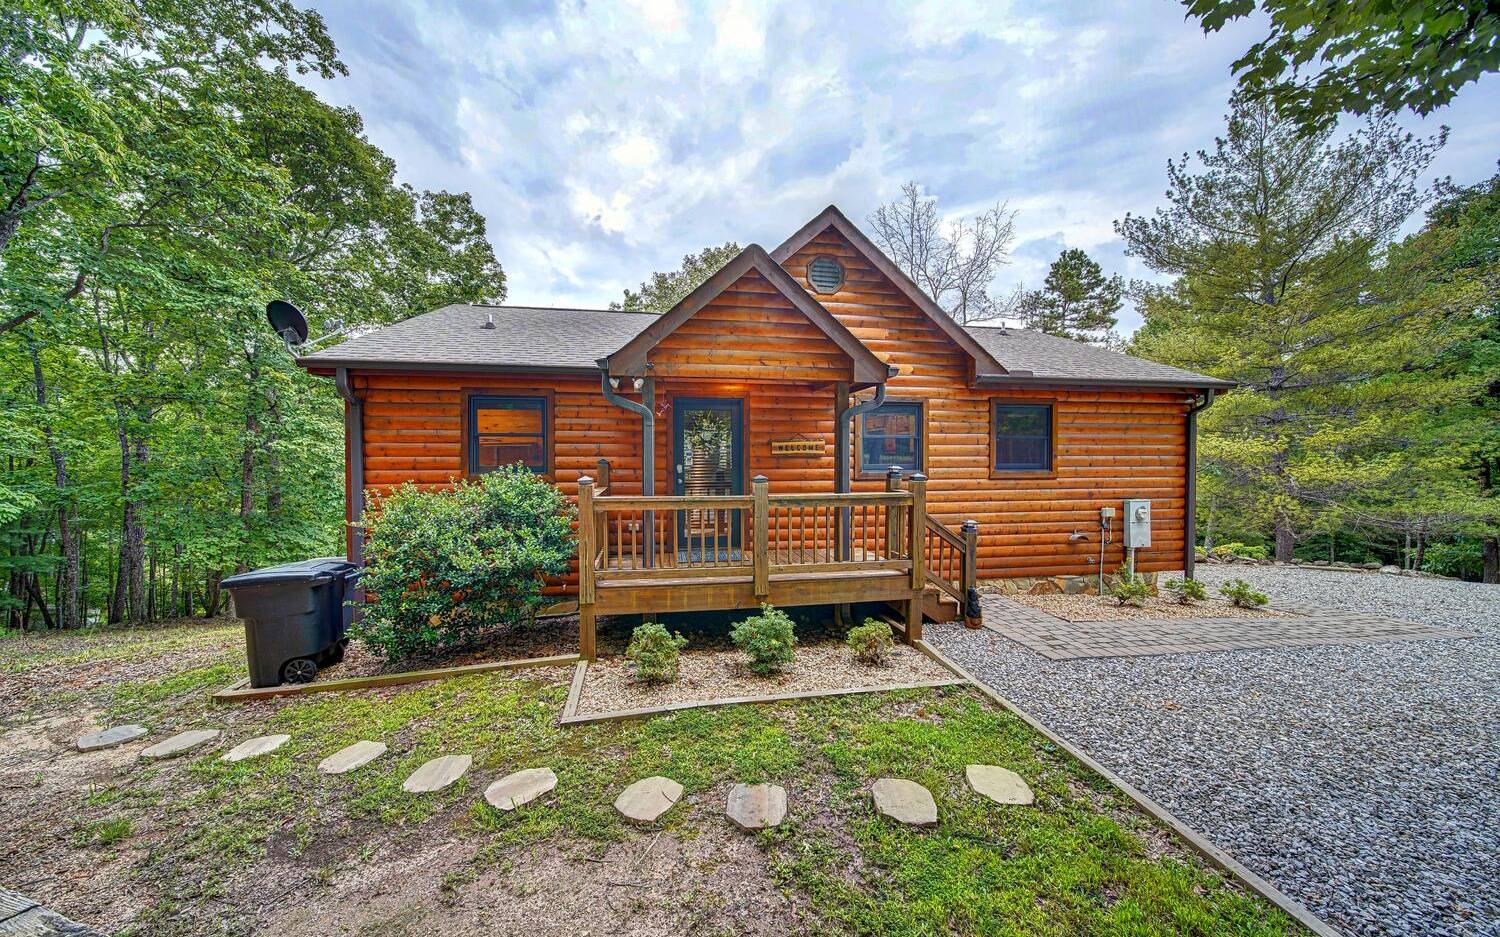 Back on market due to buyer financing. This 3BD/3.5BA cabin is a Turn-Key successful Vacation Cabin Rental/Part time Owner Residence. Split master bedrooms and Laundry on main level!! Make this your full time or vacation cabin. Easy access on paved roads and located conveniently between Blue Ridge and Blairsville. Finished Basement with Family Room, Bedroom/Full Bath and Workshop/Storage area. The cabin has whole house water filter system, large designer hot tub and security cameras. Property has level parking for several cars. All this PLUS a Seasonal Mountain View! Brand New HVAC, Kitchen Stove & Hot Tub.